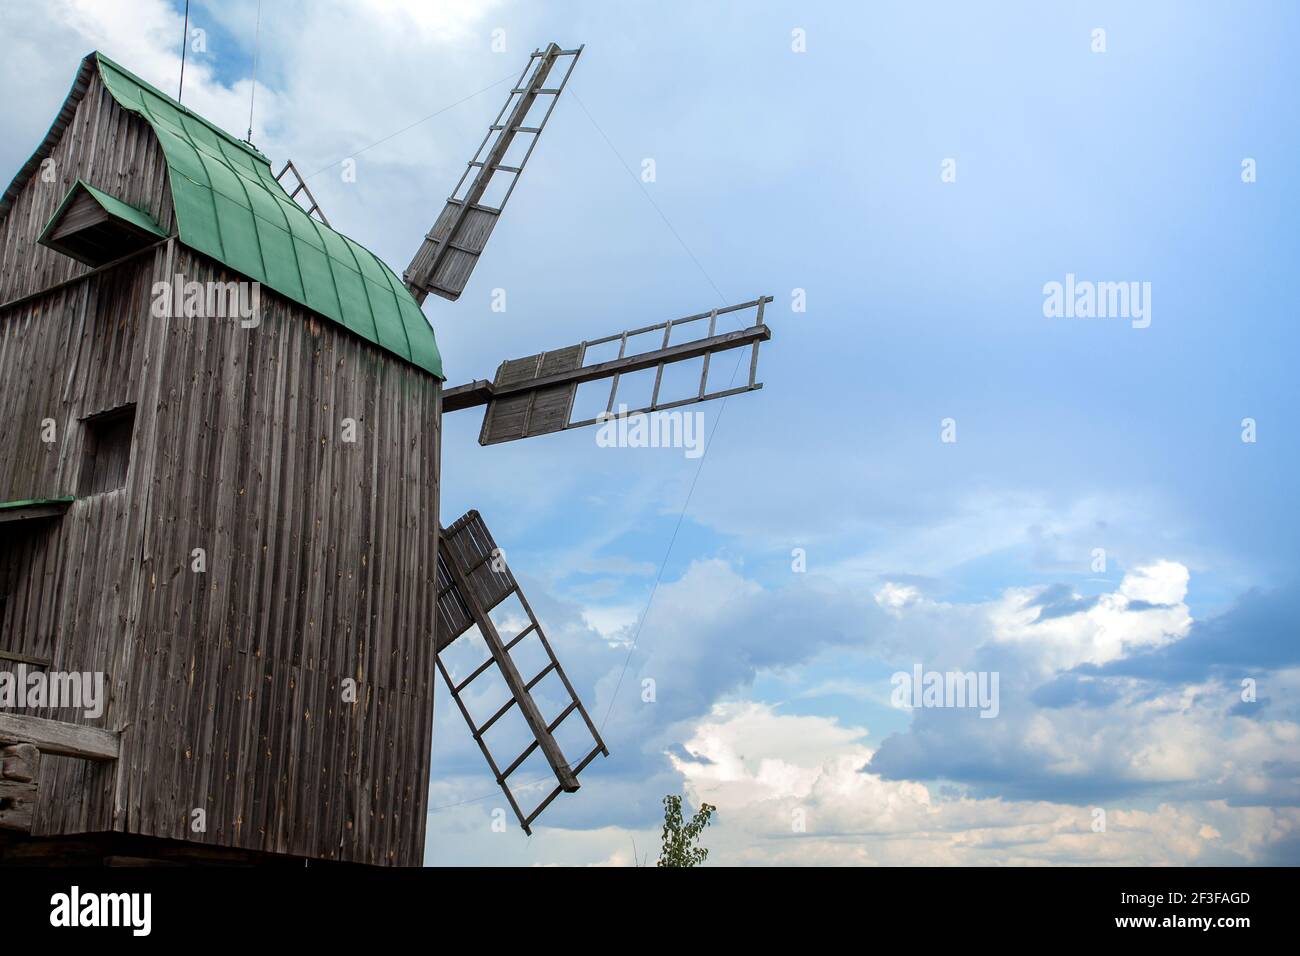 Summer landscape with an old wooden mill Stock Photo